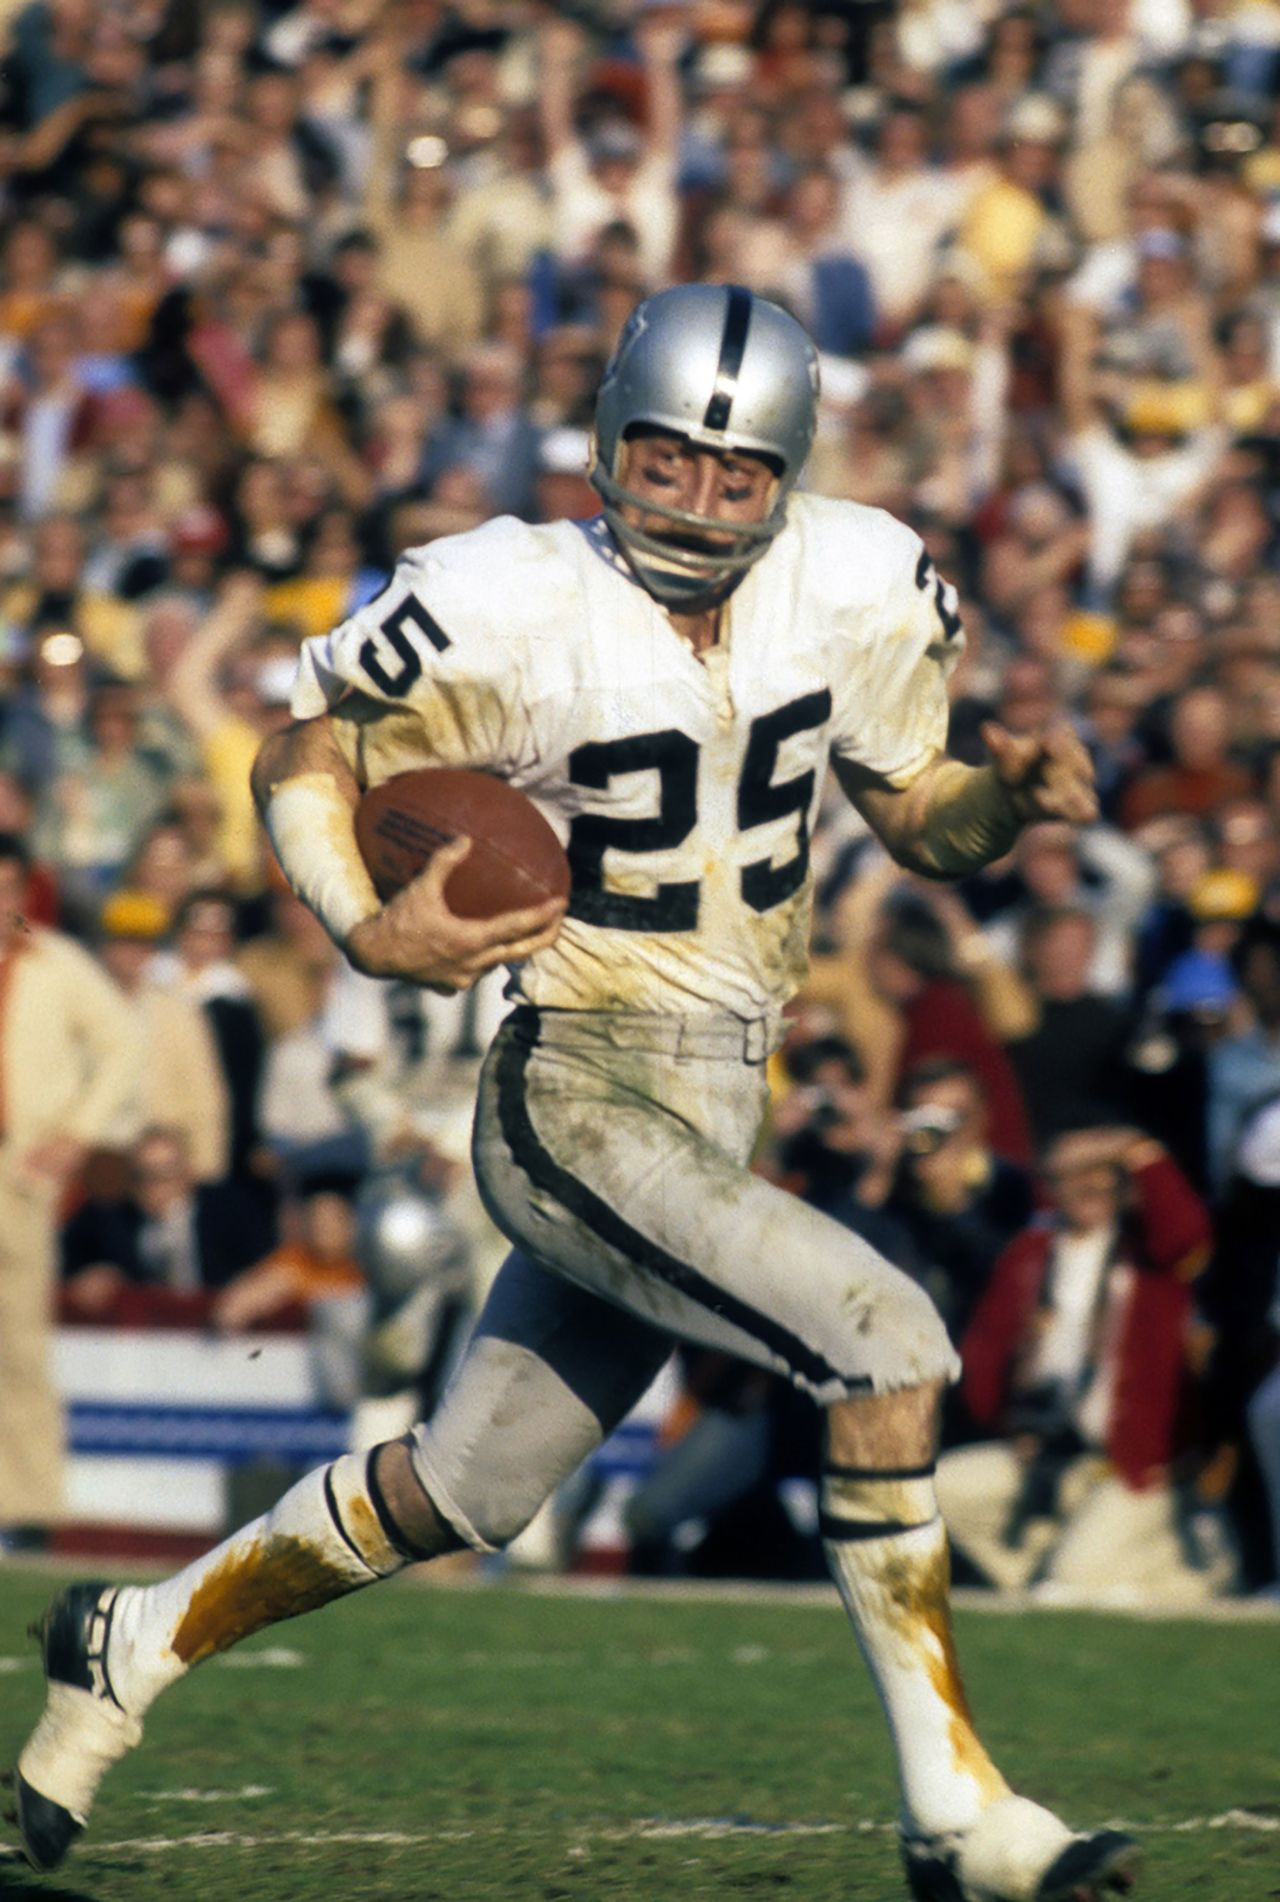 <strong>Super Bowl XI (1977):</strong> Oakland Raiders wide receiver Fred Biletnikoff caught four passes for 79 yards to win MVP honors in Super Bowl XI. The Raiders won 32-14 over Minnesota, knocking the Vikings to 0-4 in Super Bowls.